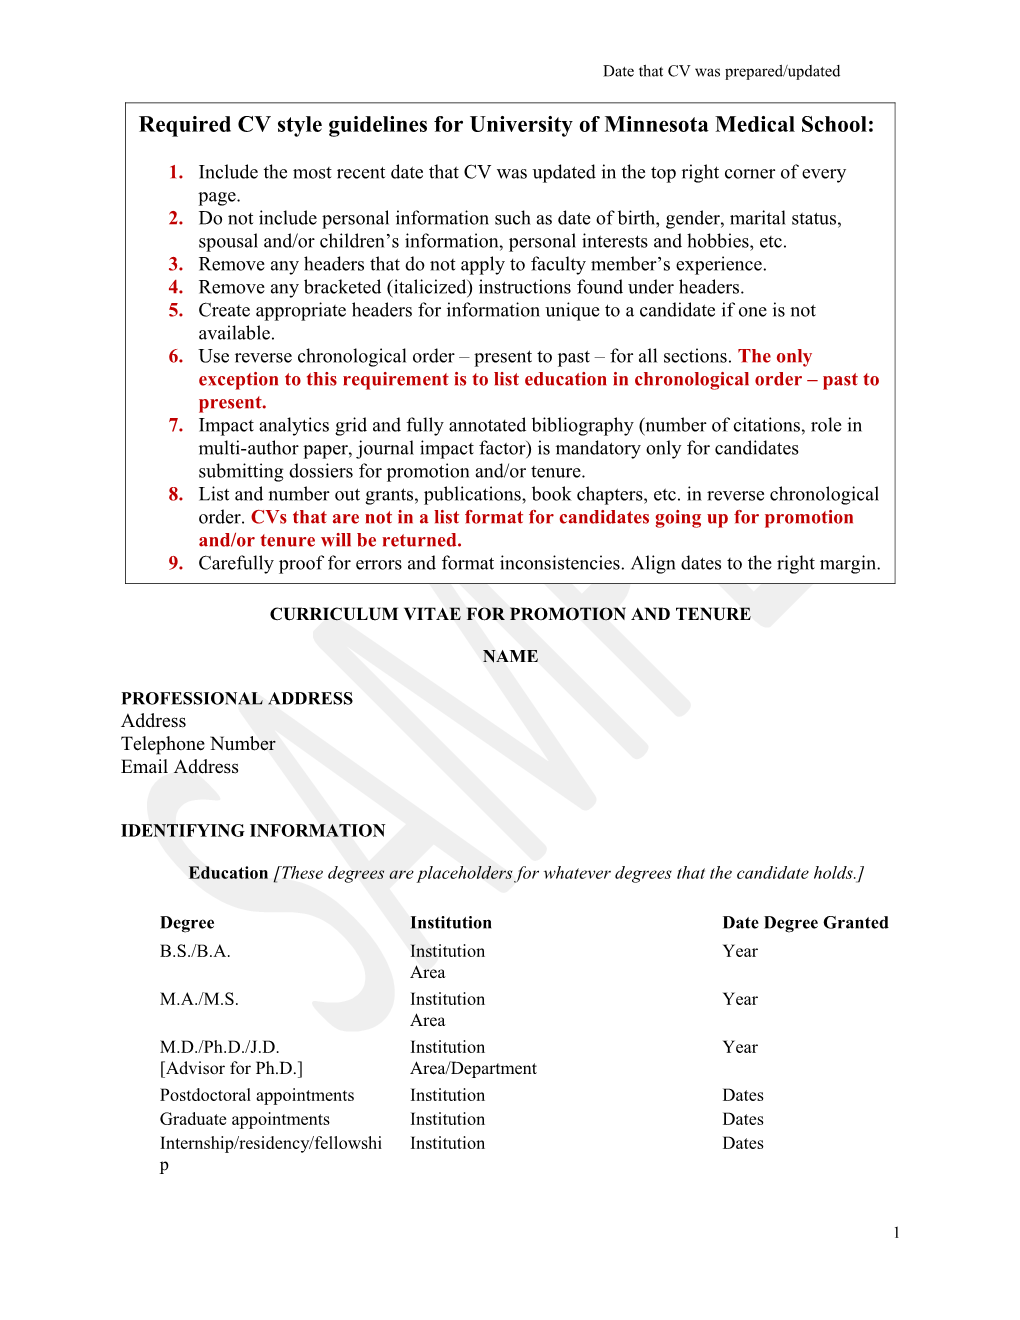 Curriculum Vitae for Promotion and Tenure